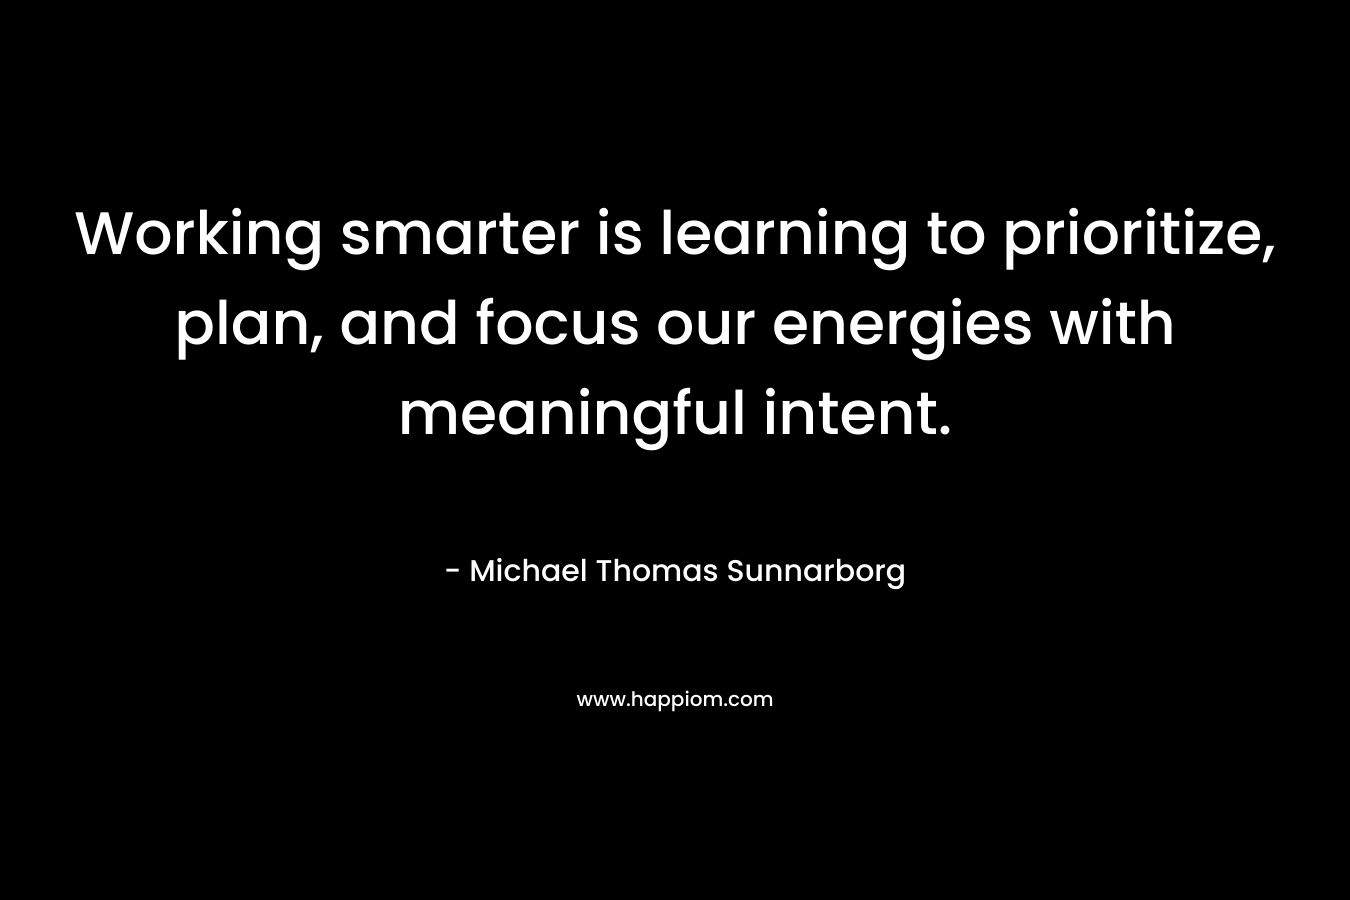 Working smarter is learning to prioritize, plan, and focus our energies with meaningful intent. – Michael Thomas Sunnarborg